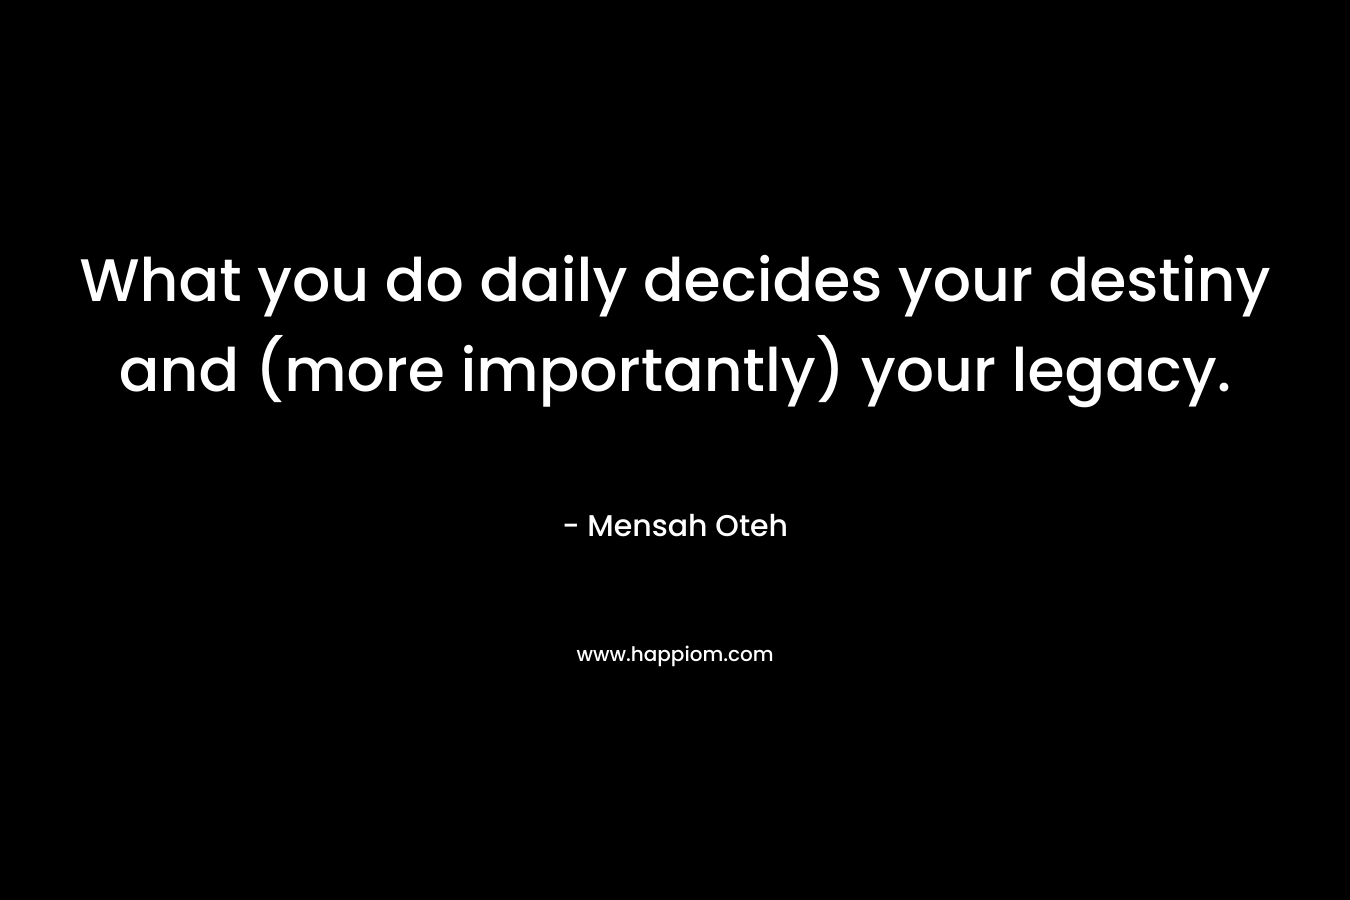 What you do daily decides your destiny and (more importantly) your legacy.